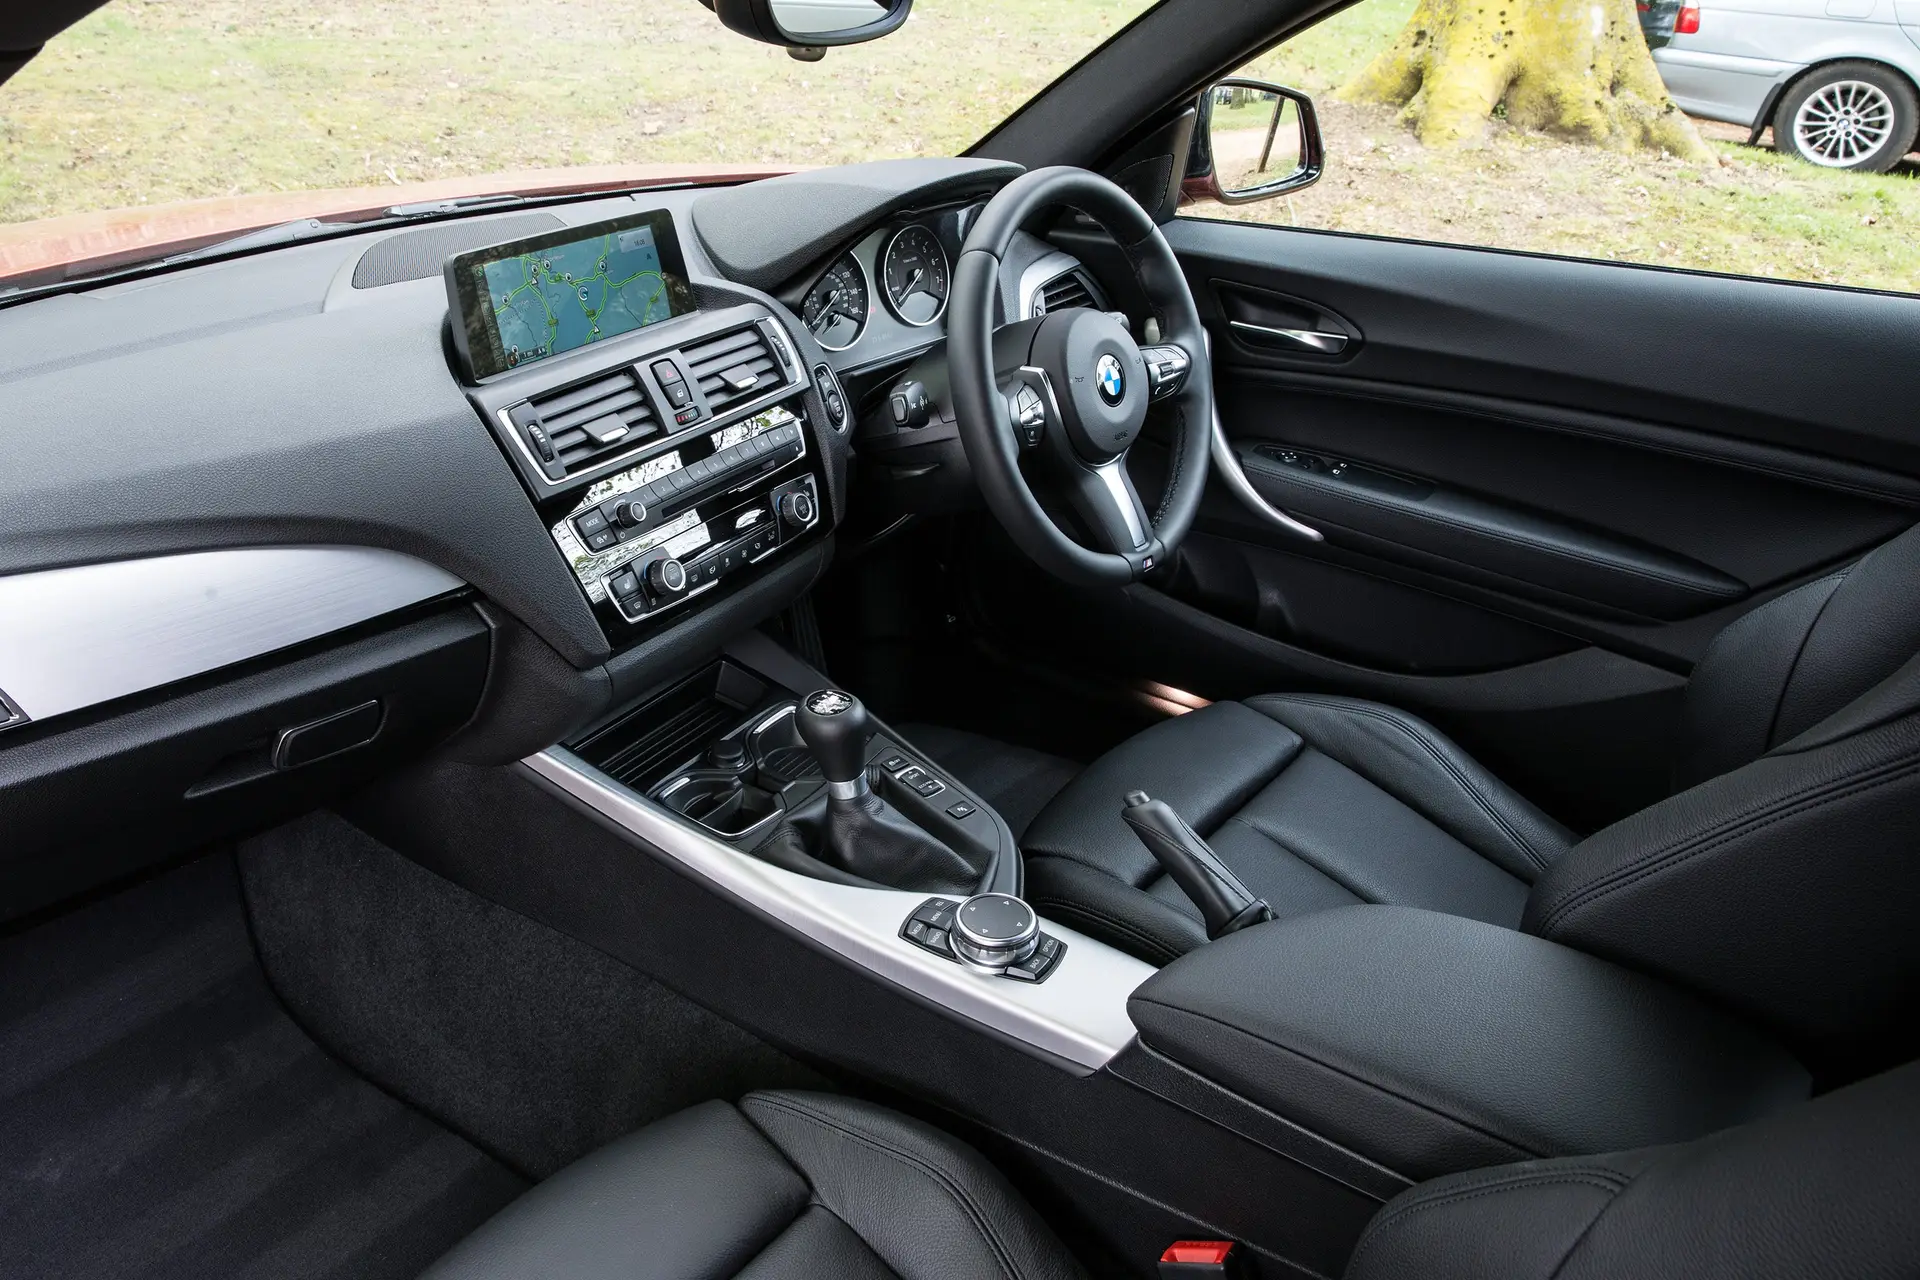 Used BMW 1 Series (2011-2019) Review Interior Black Leather 